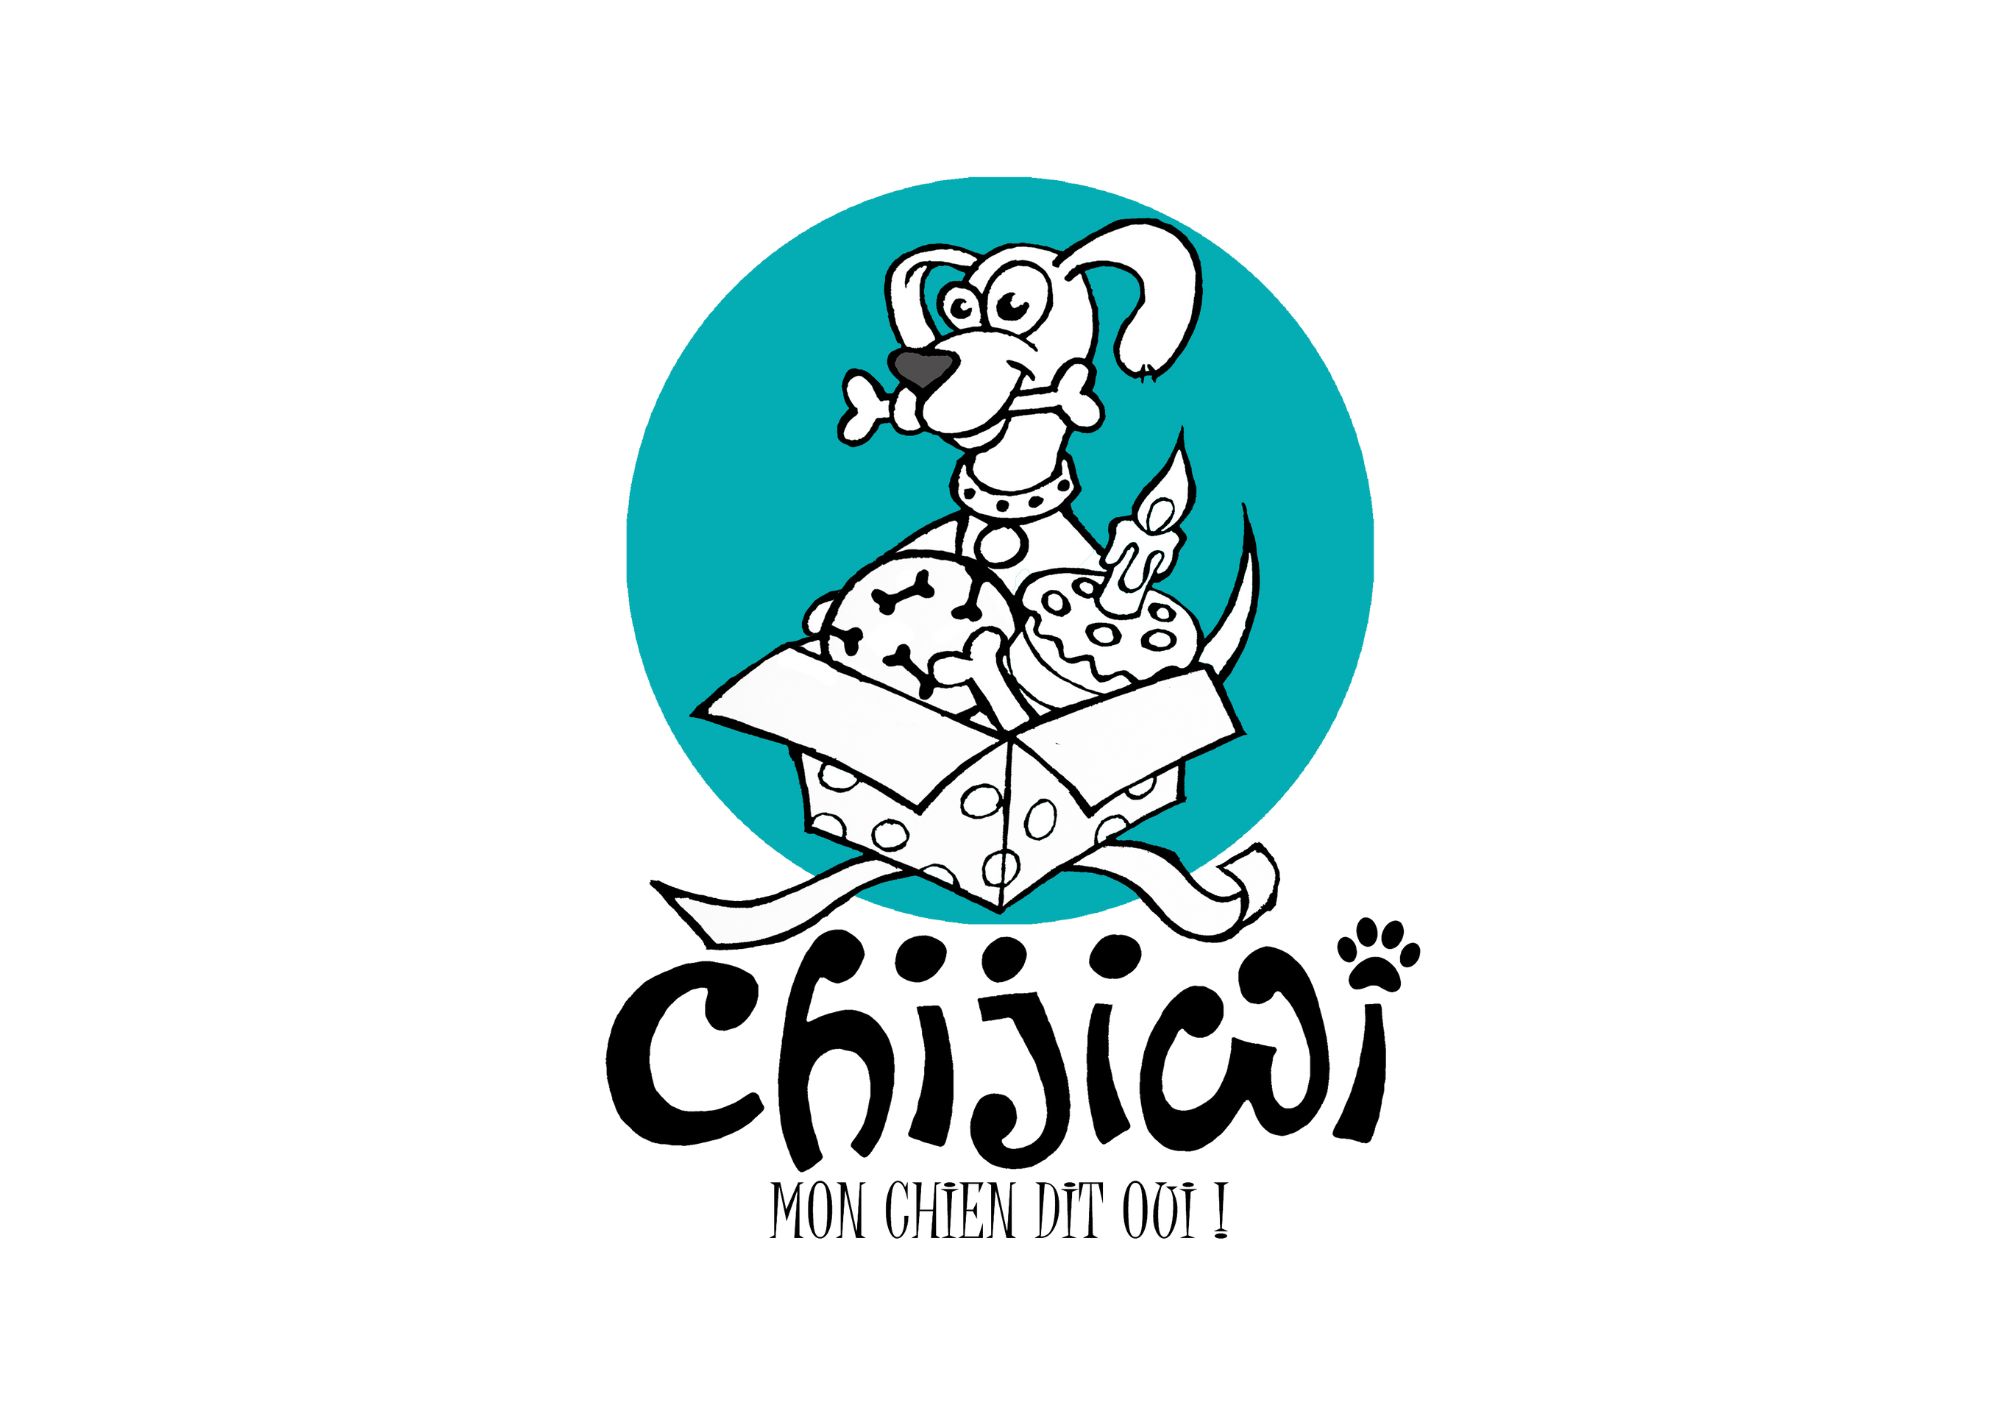 Diagnosing the shelf life of dog birthday cakes: the CTCPA supports Chijiwi